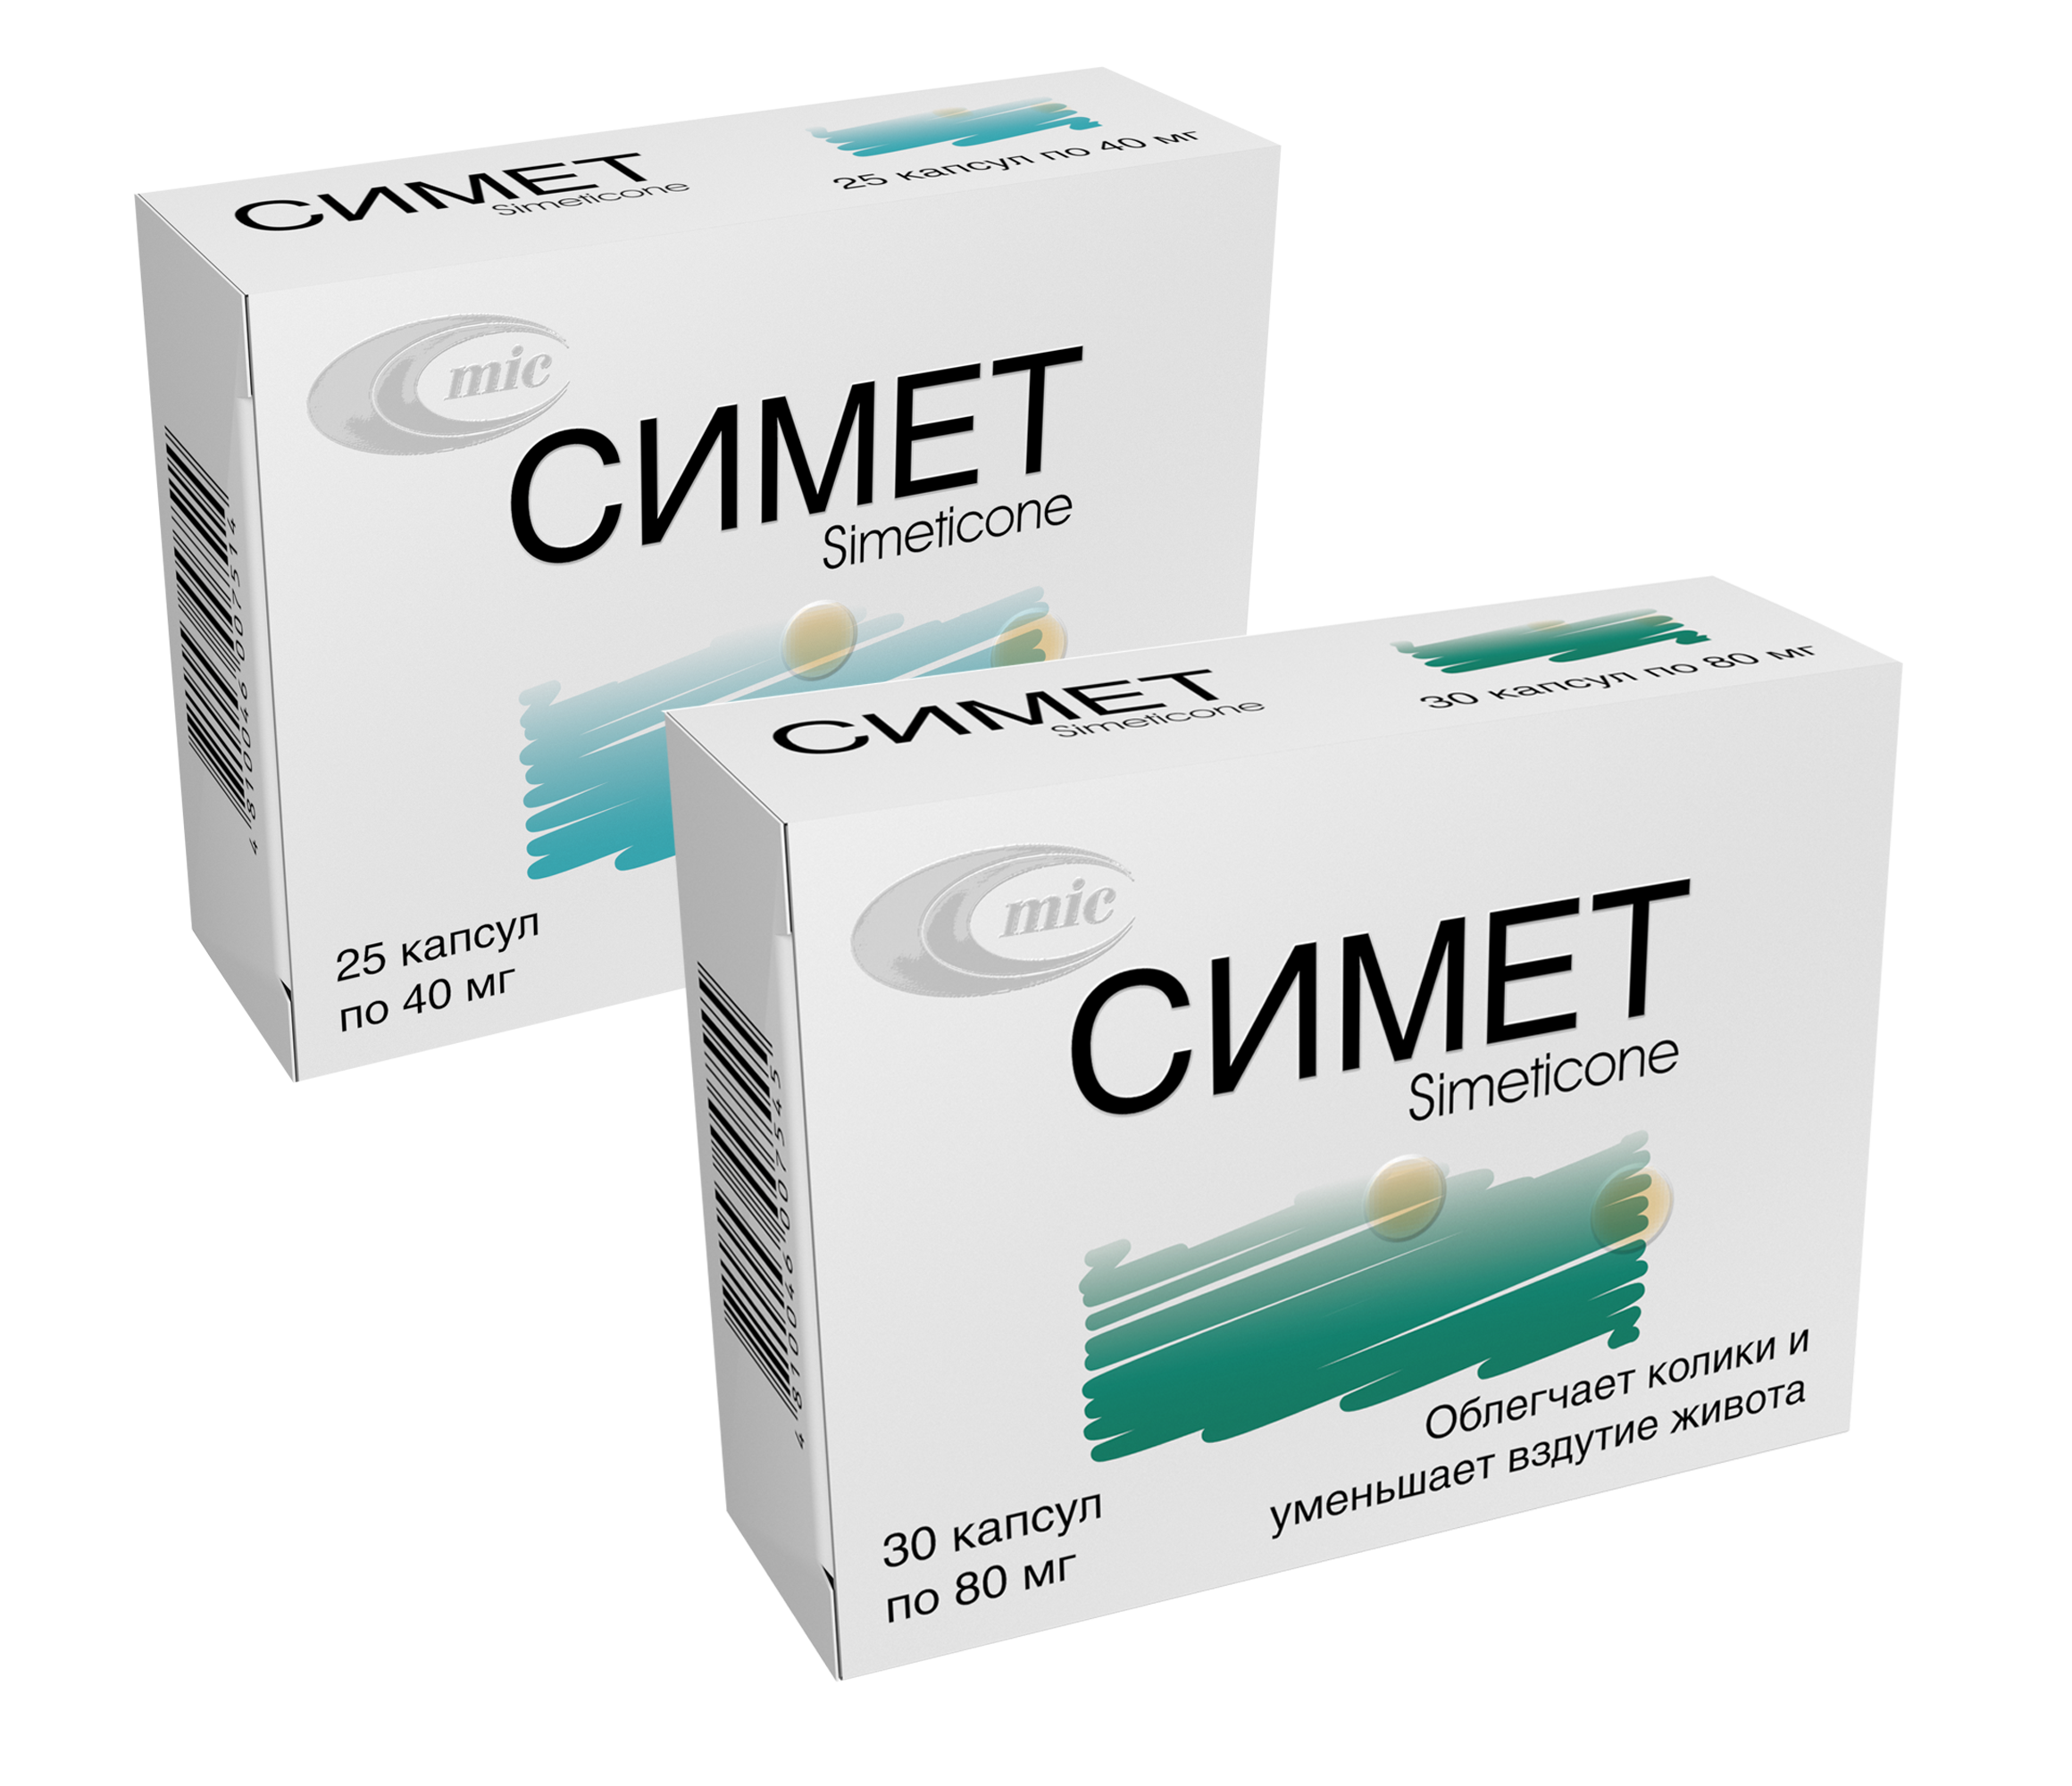 The Unitary Enterprise “Minskintercaps” launched the sale of a new drug “Simet”in August 2018